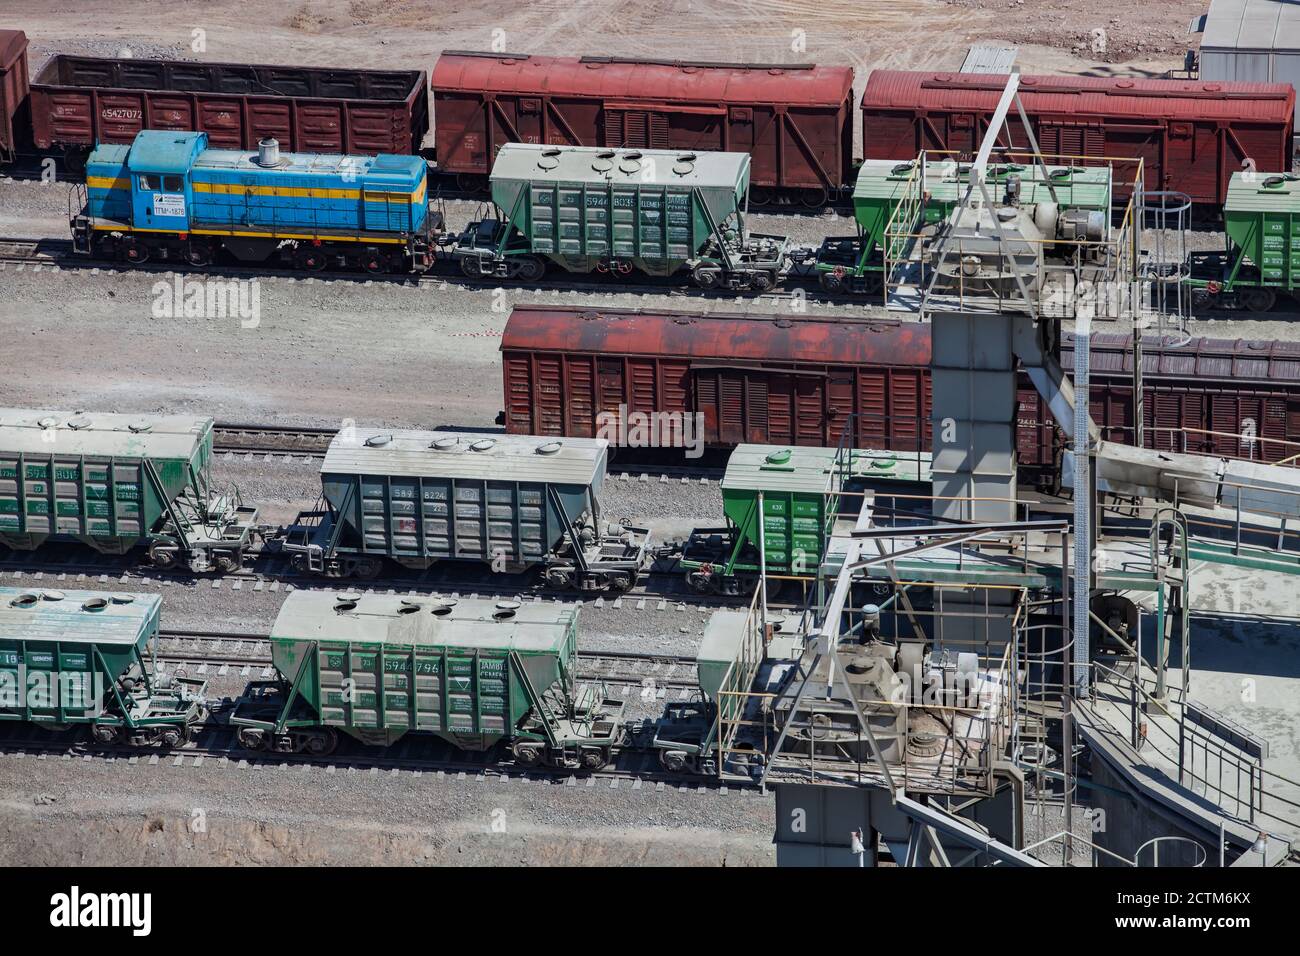 Mynaral/Kazakhstan - April 23 2012: Cargo railroad terminal of Modern cement plant in desert. Railway carriages and locomotive. Stock Photo